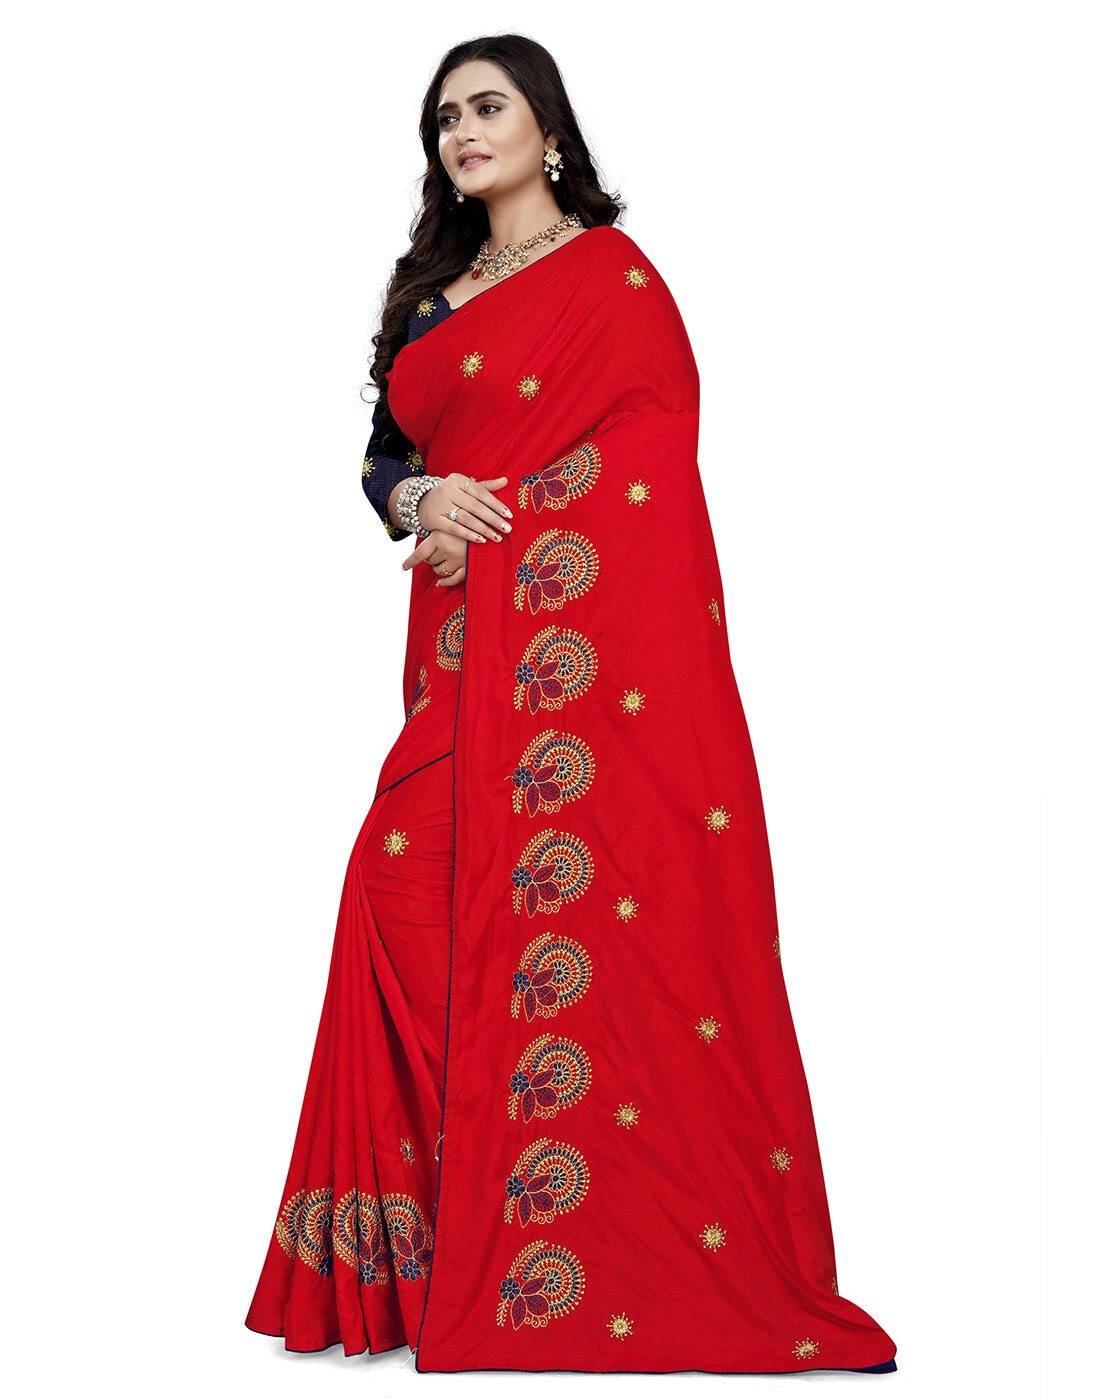 Red Pr Fashion Launched New Readymade Saree, Dry clean at Rs 2295